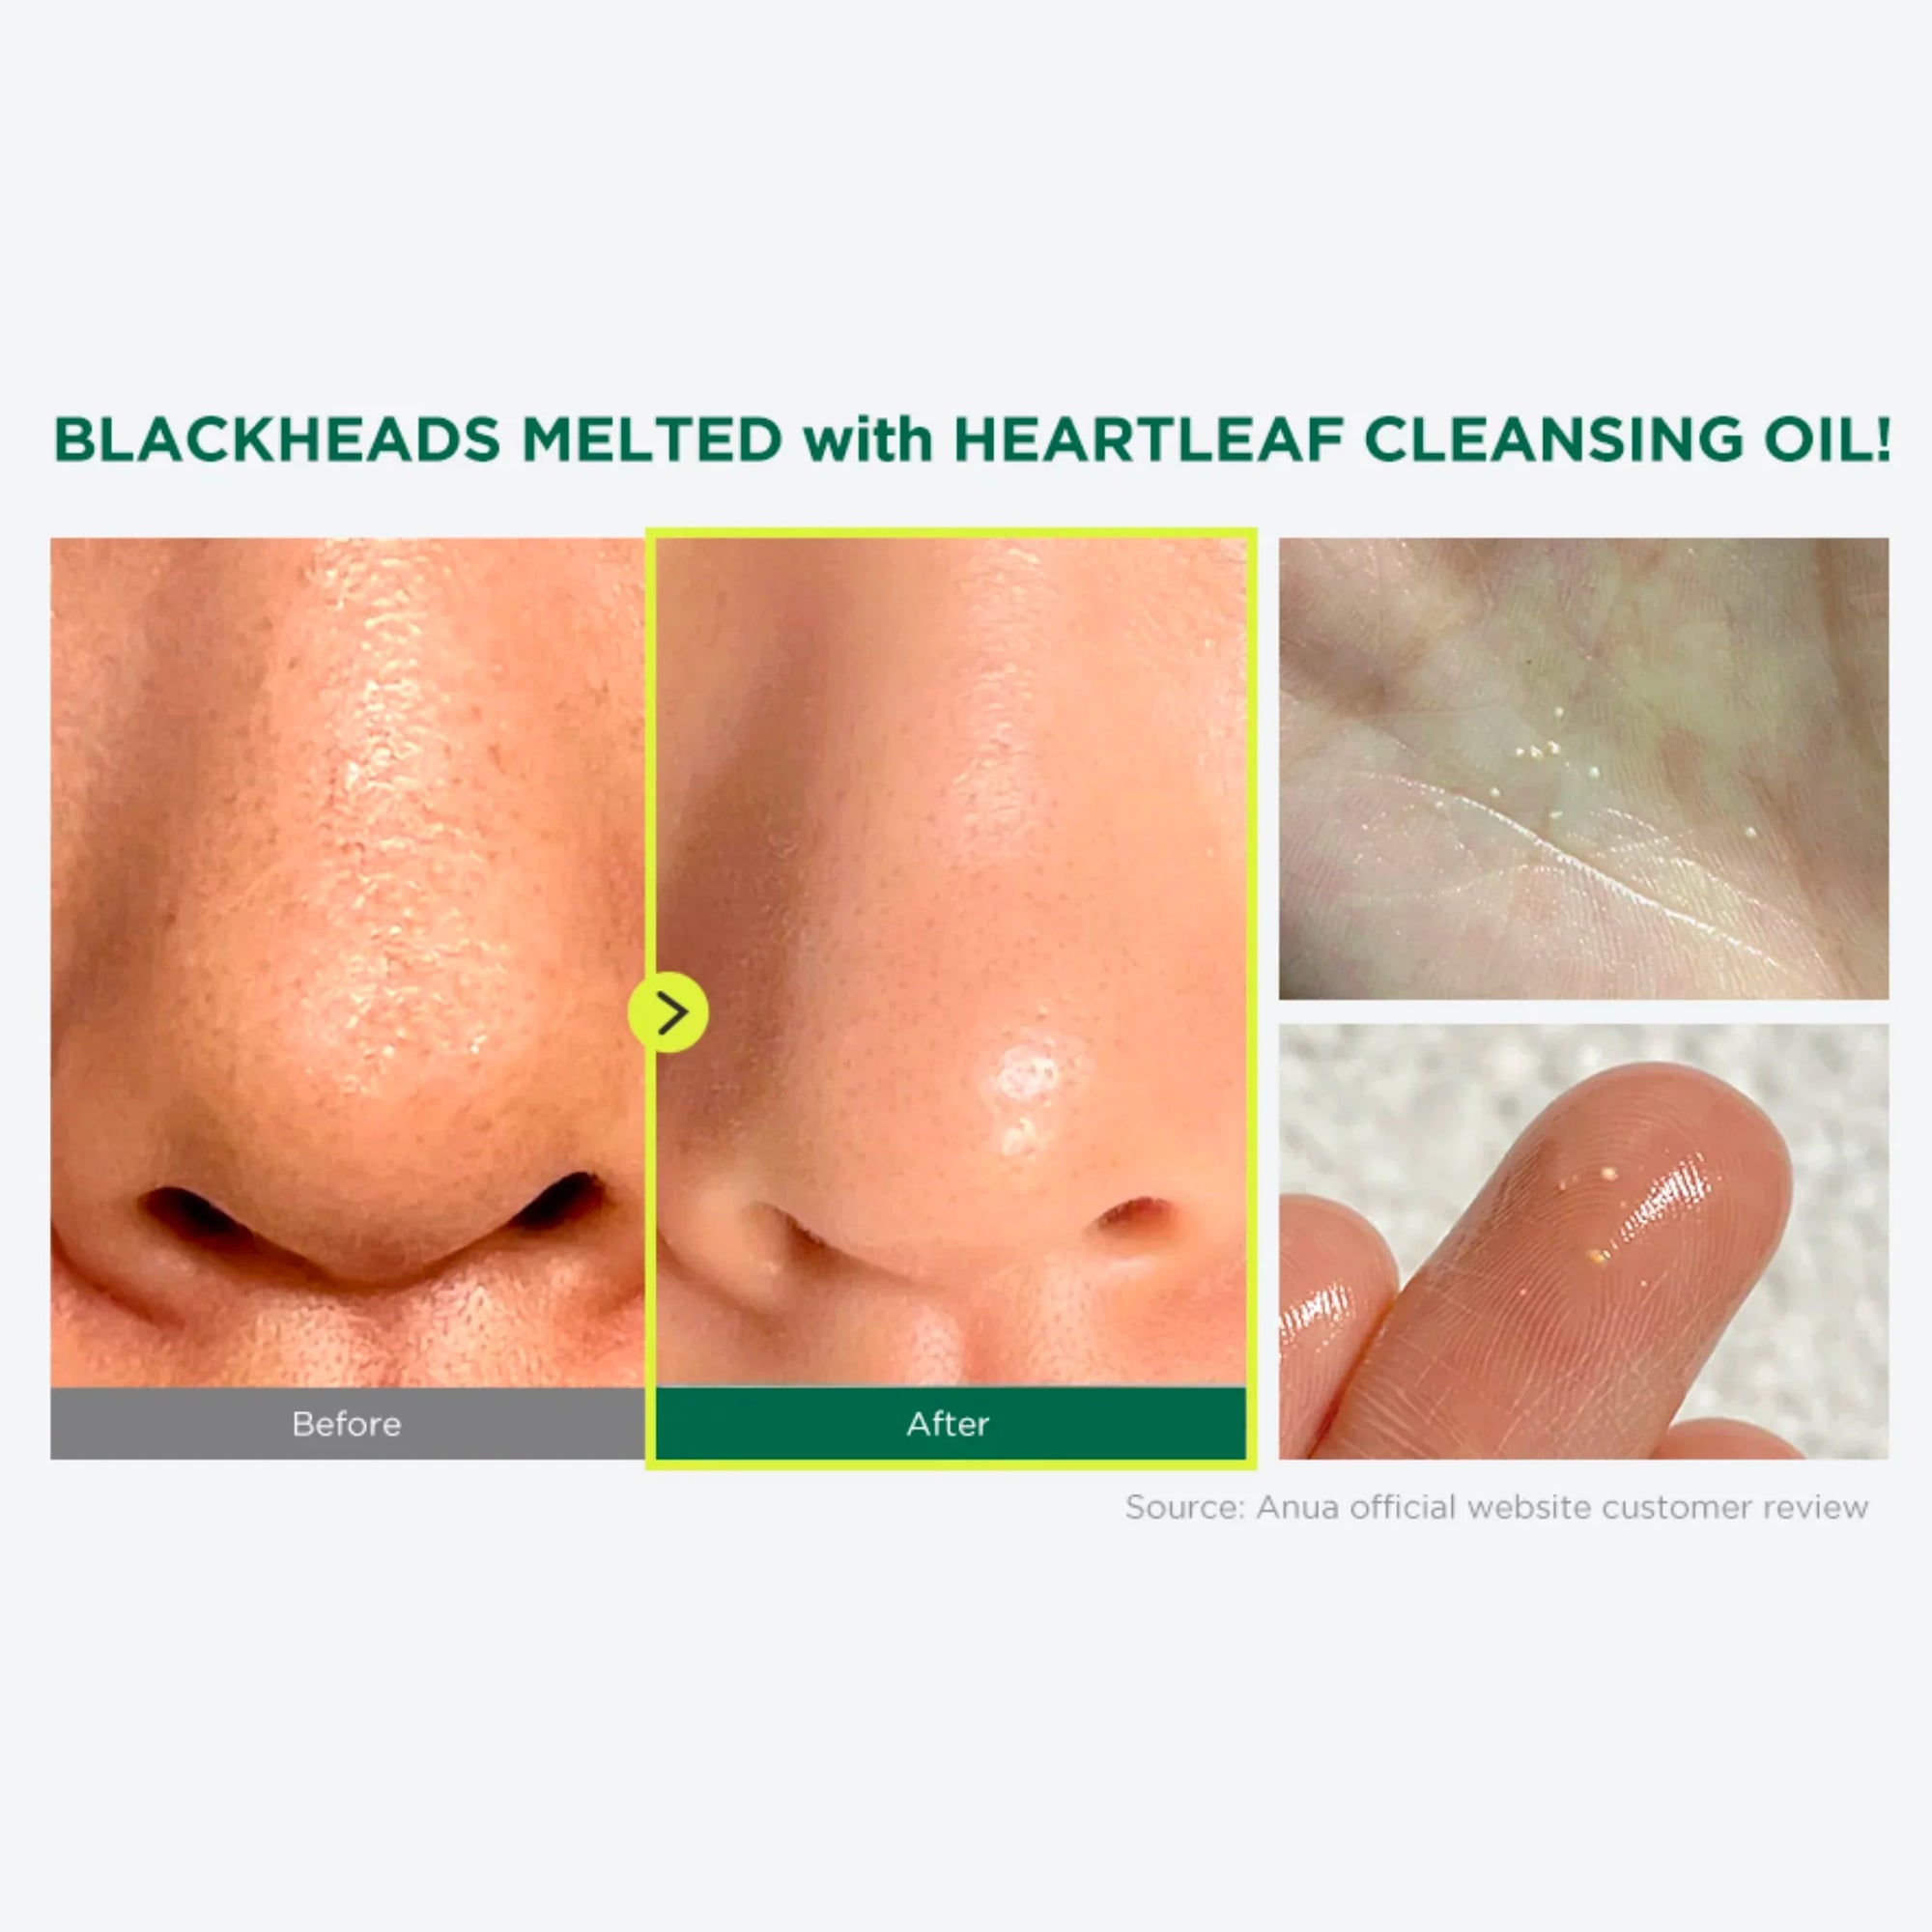 Heartleaf Pore Control Cleansing Oil - Expert Reviews on Blackhead Banishing Properties